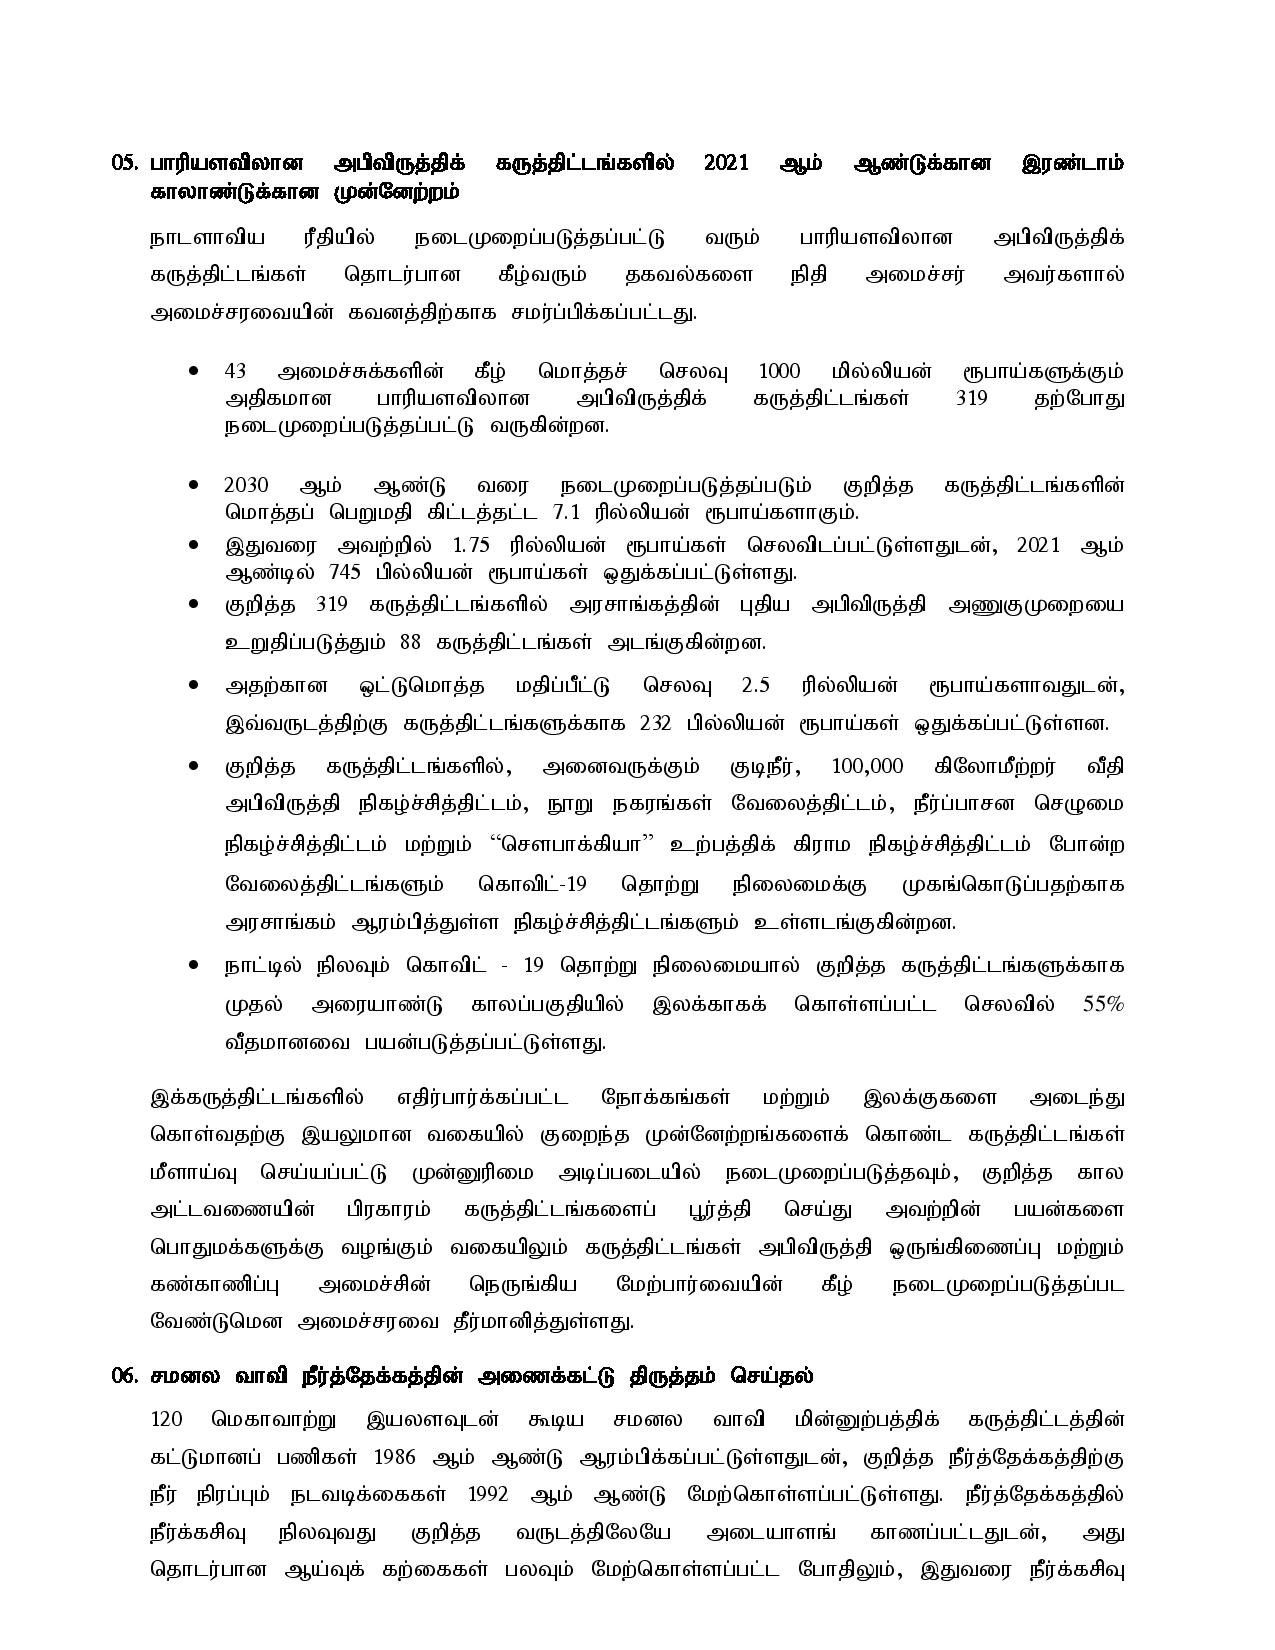 Canbinet Decision on 23.08.2021 Tamil page 003